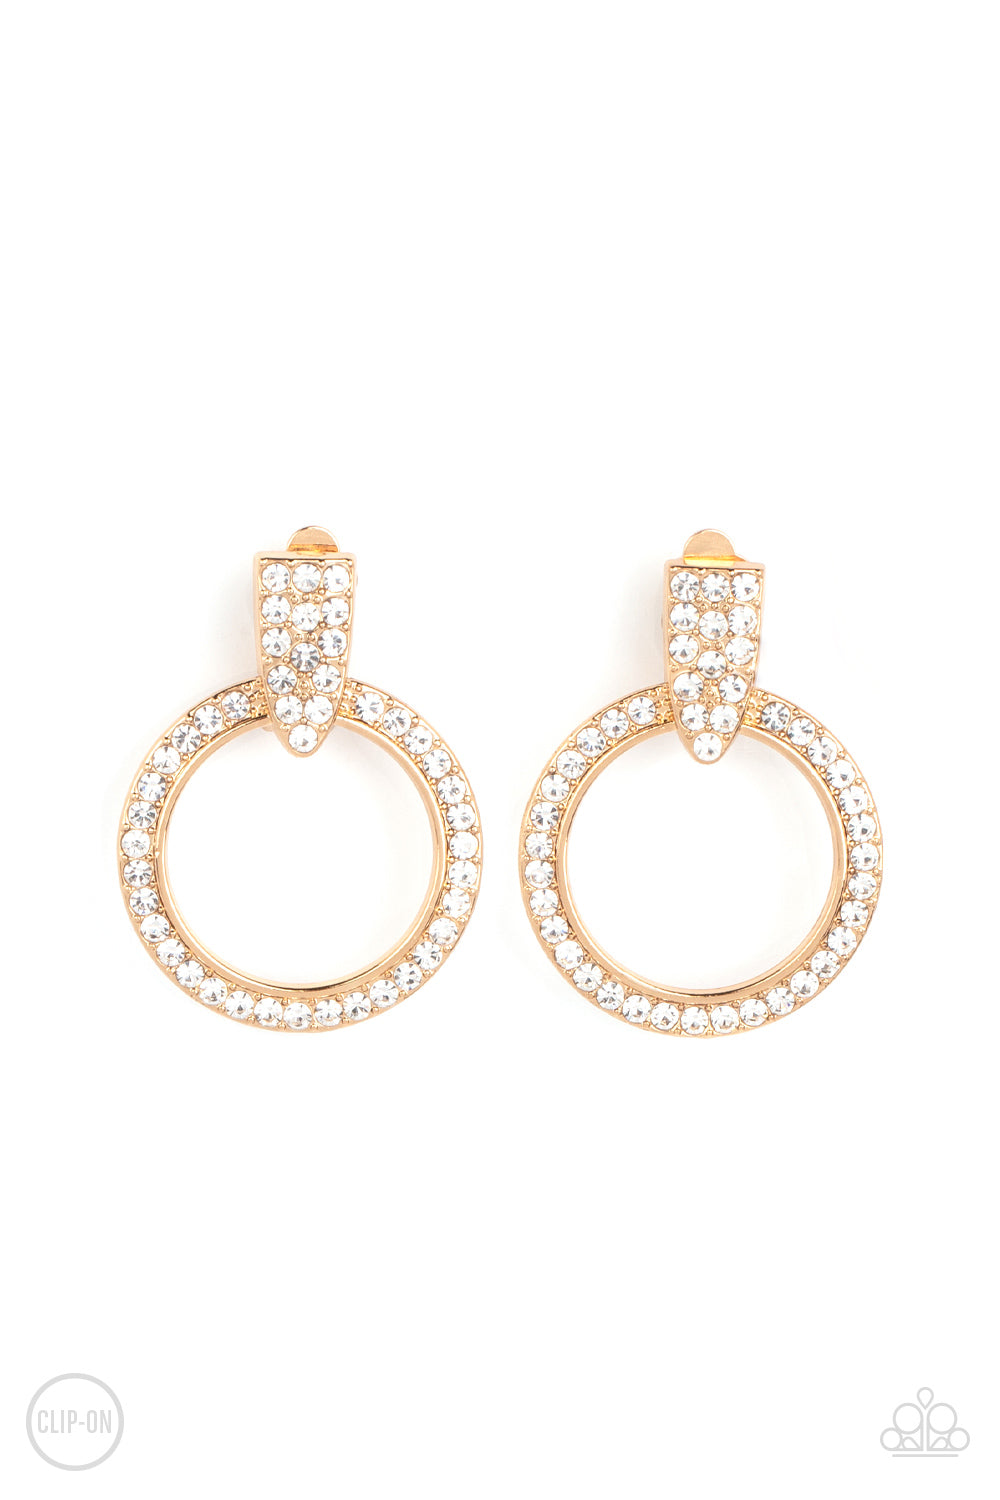 Sparkle at Your Service Gold Clip-On Earring - Paparazzi Accessories  Encrusted in glassy white rhinestones, a gold hoop attaches to a triangular gold fitting for a classic sparkle. Earring attaches to a standard clip-on fitting.  Sold as one pair of clip-on earrings.